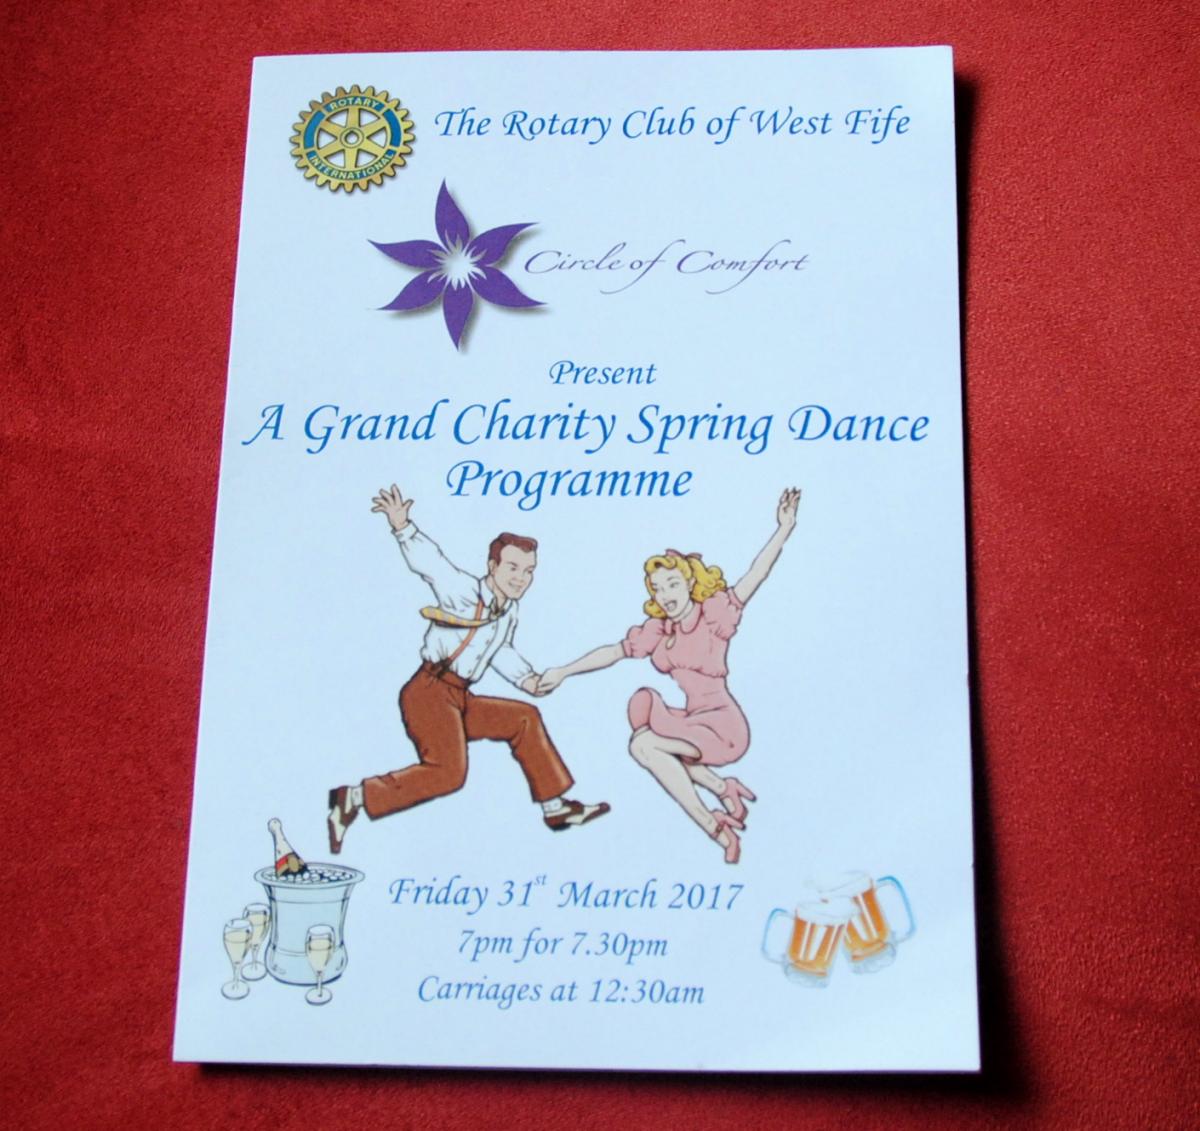 Grand Charity Spring Dance - GRAND CHARITY SPRING DANCE